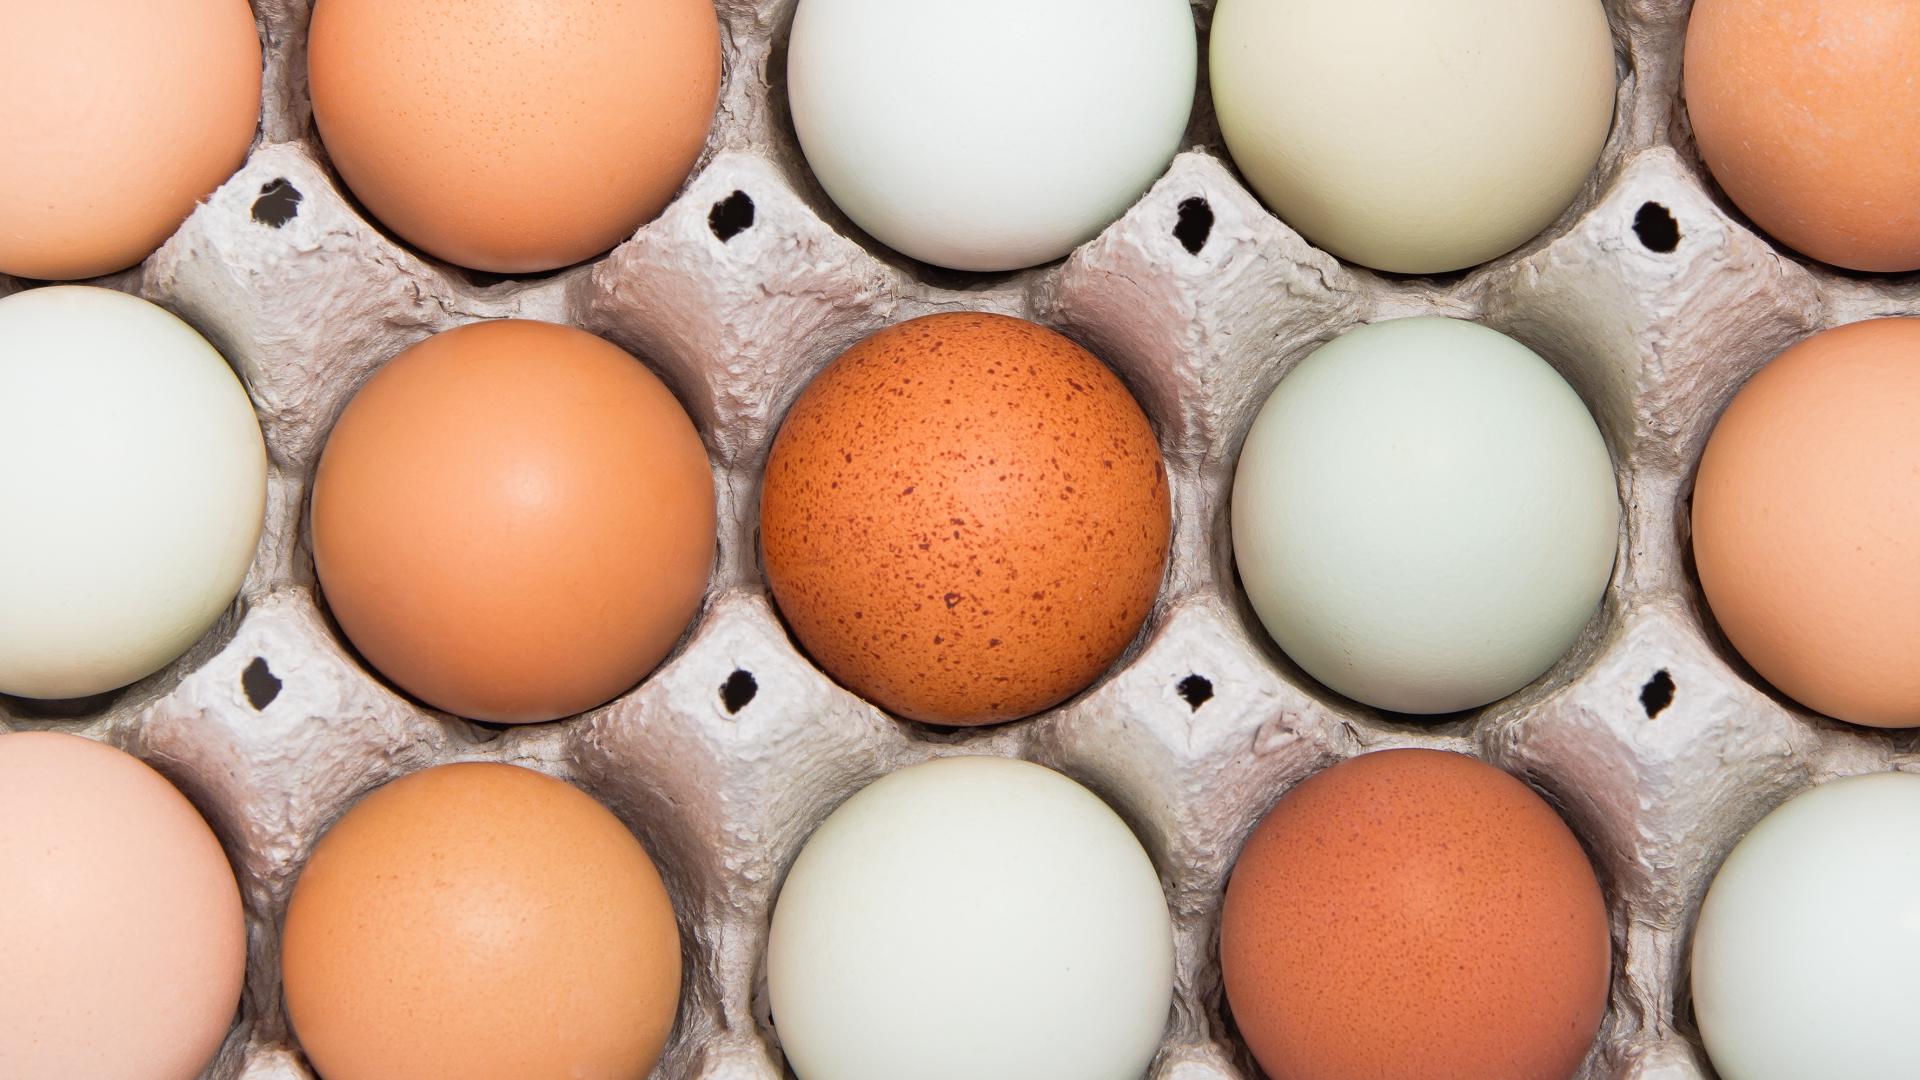 Research now suggests that eating a dozen or more eggs per week may not have a negative impact on cholesterol for adults over 50.